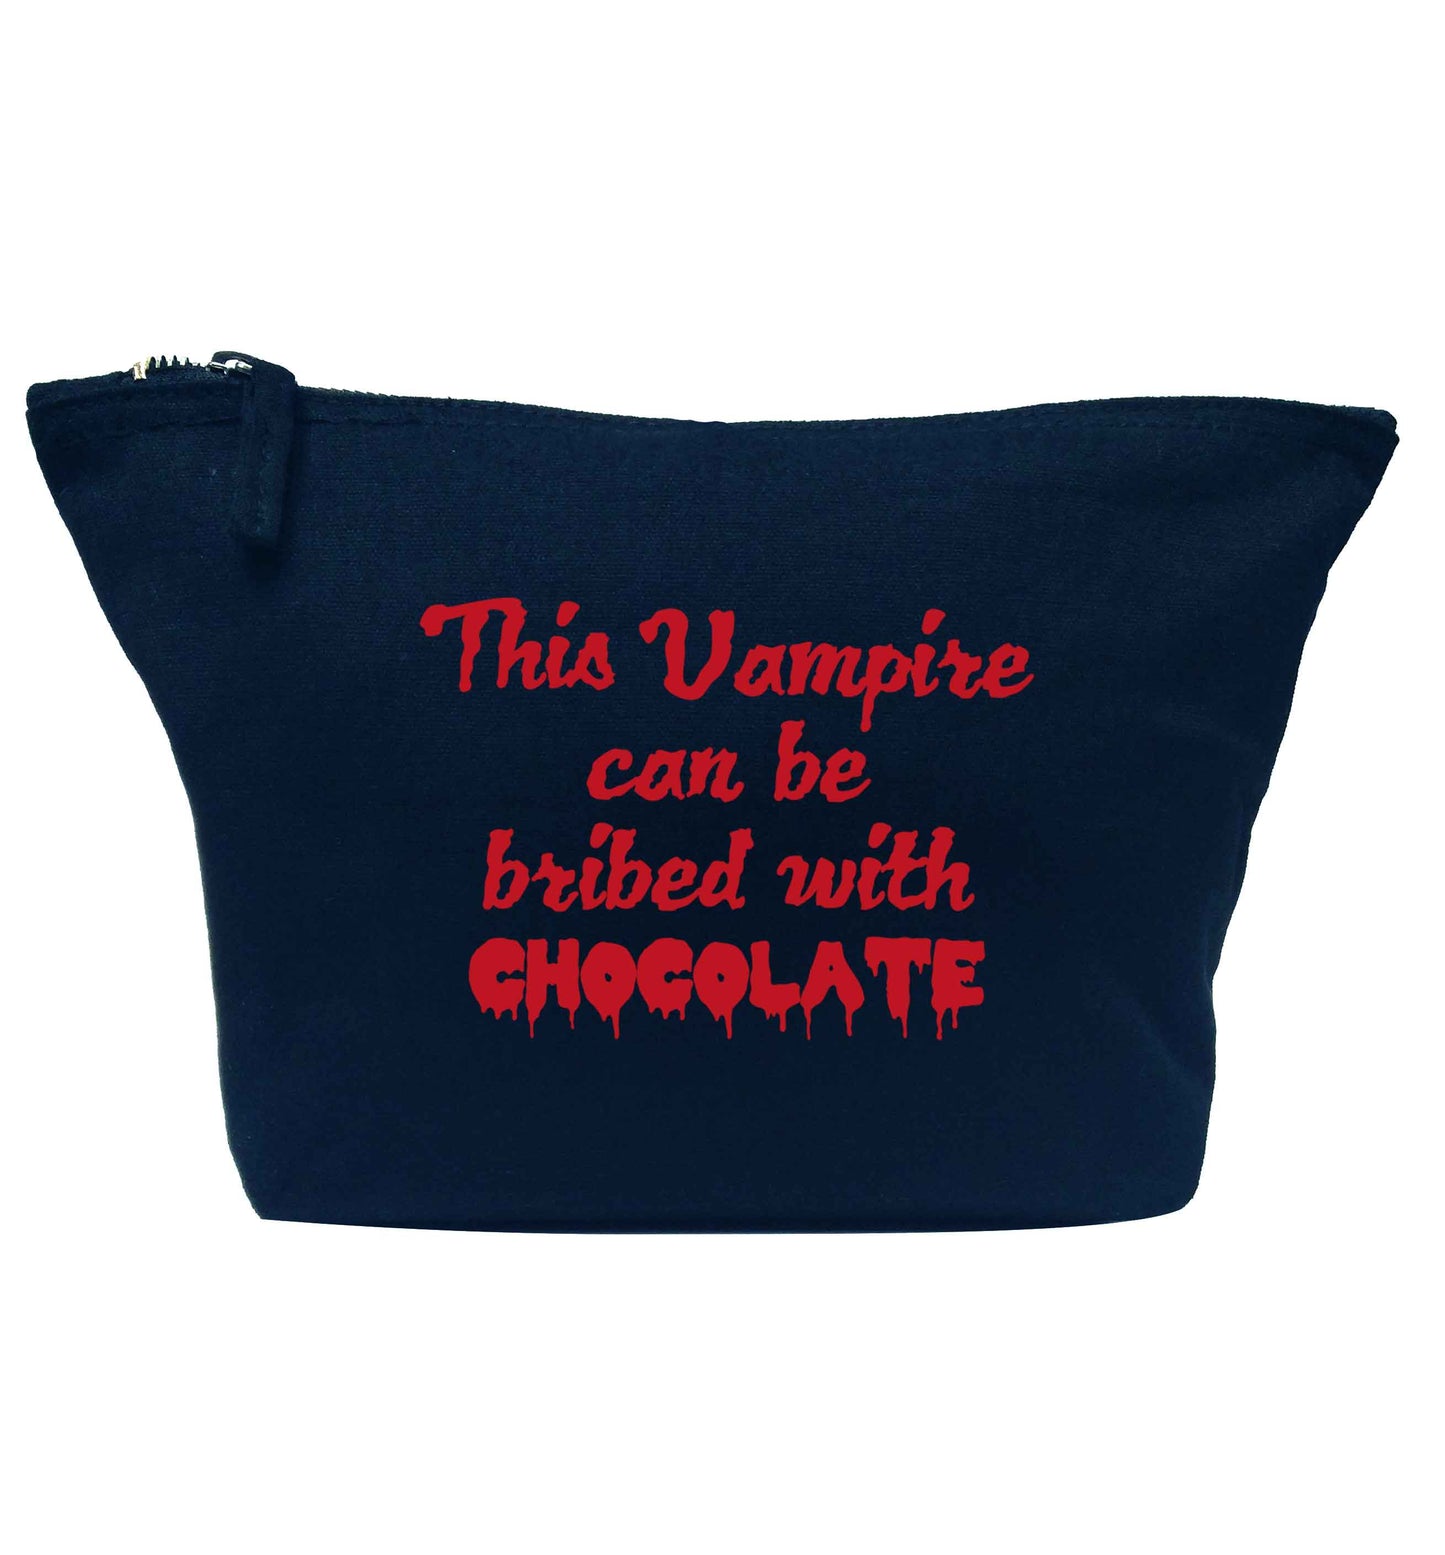 This vampire can be bribed with chocolate navy makeup bag